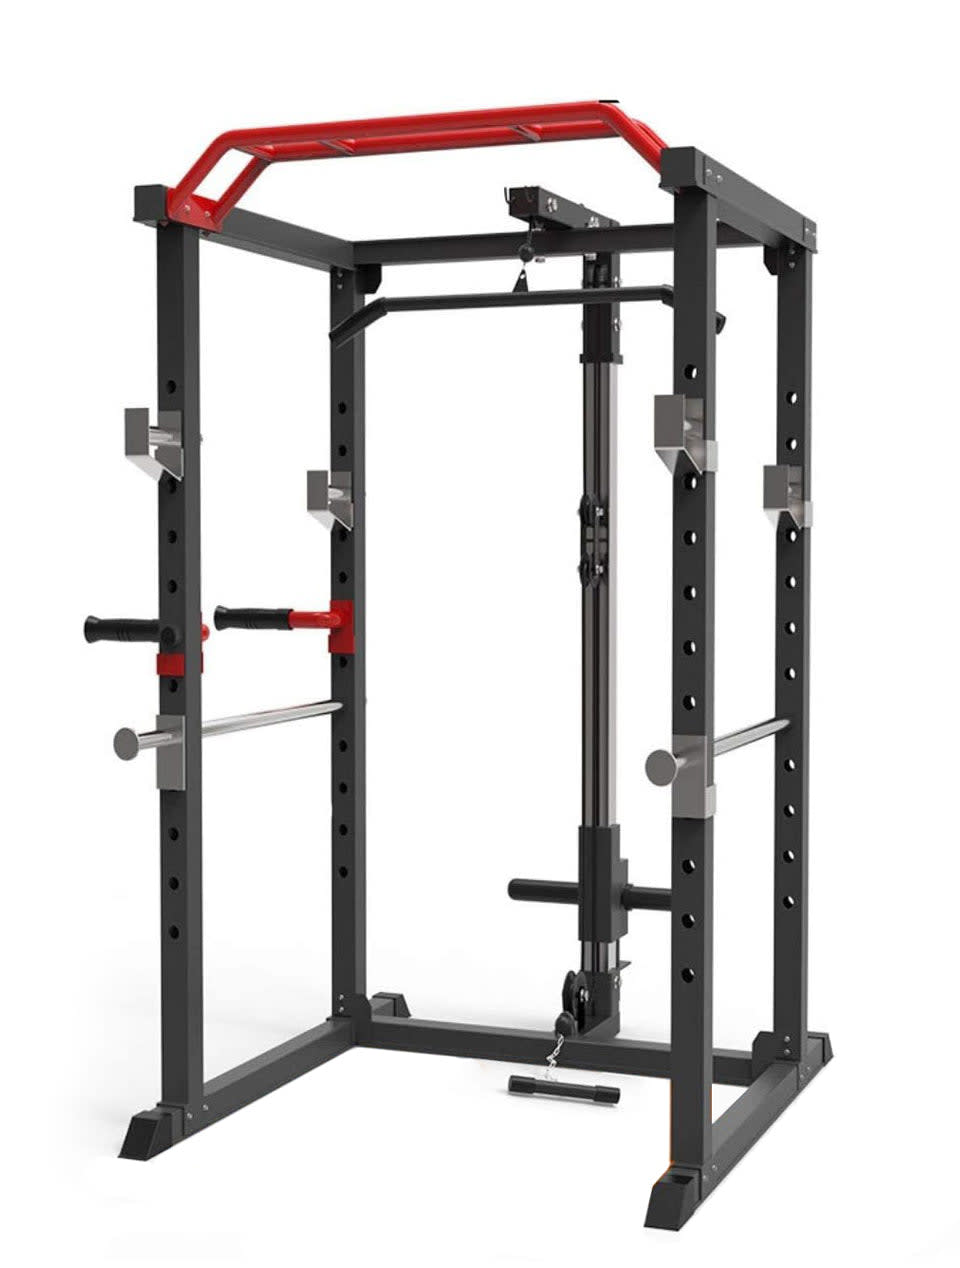 441 Fitness Heavy Duty Squat Rack & Power Cage with Pull Up Bar and Lat Attachment J008 - Grey Color Frame